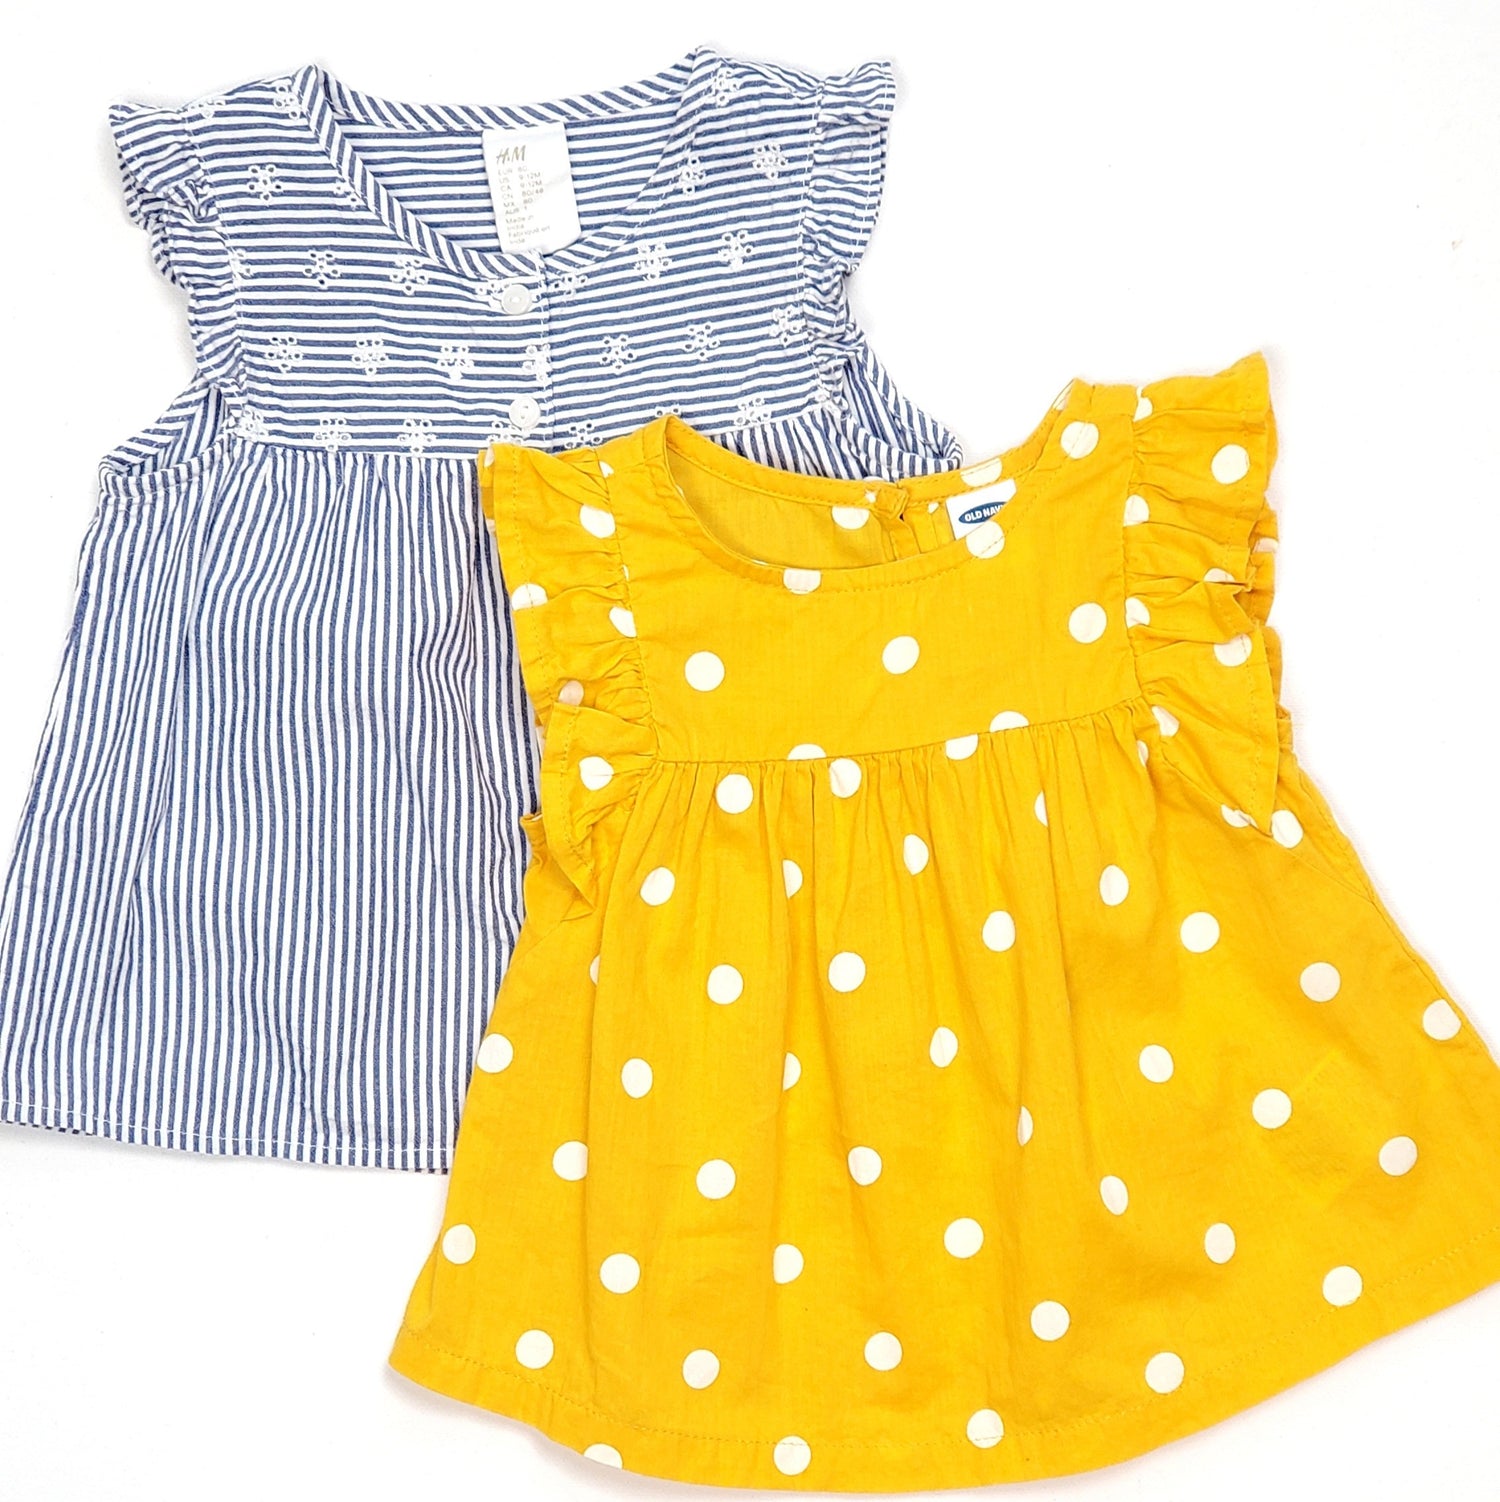 New and Used Baby Girl Shirts Online